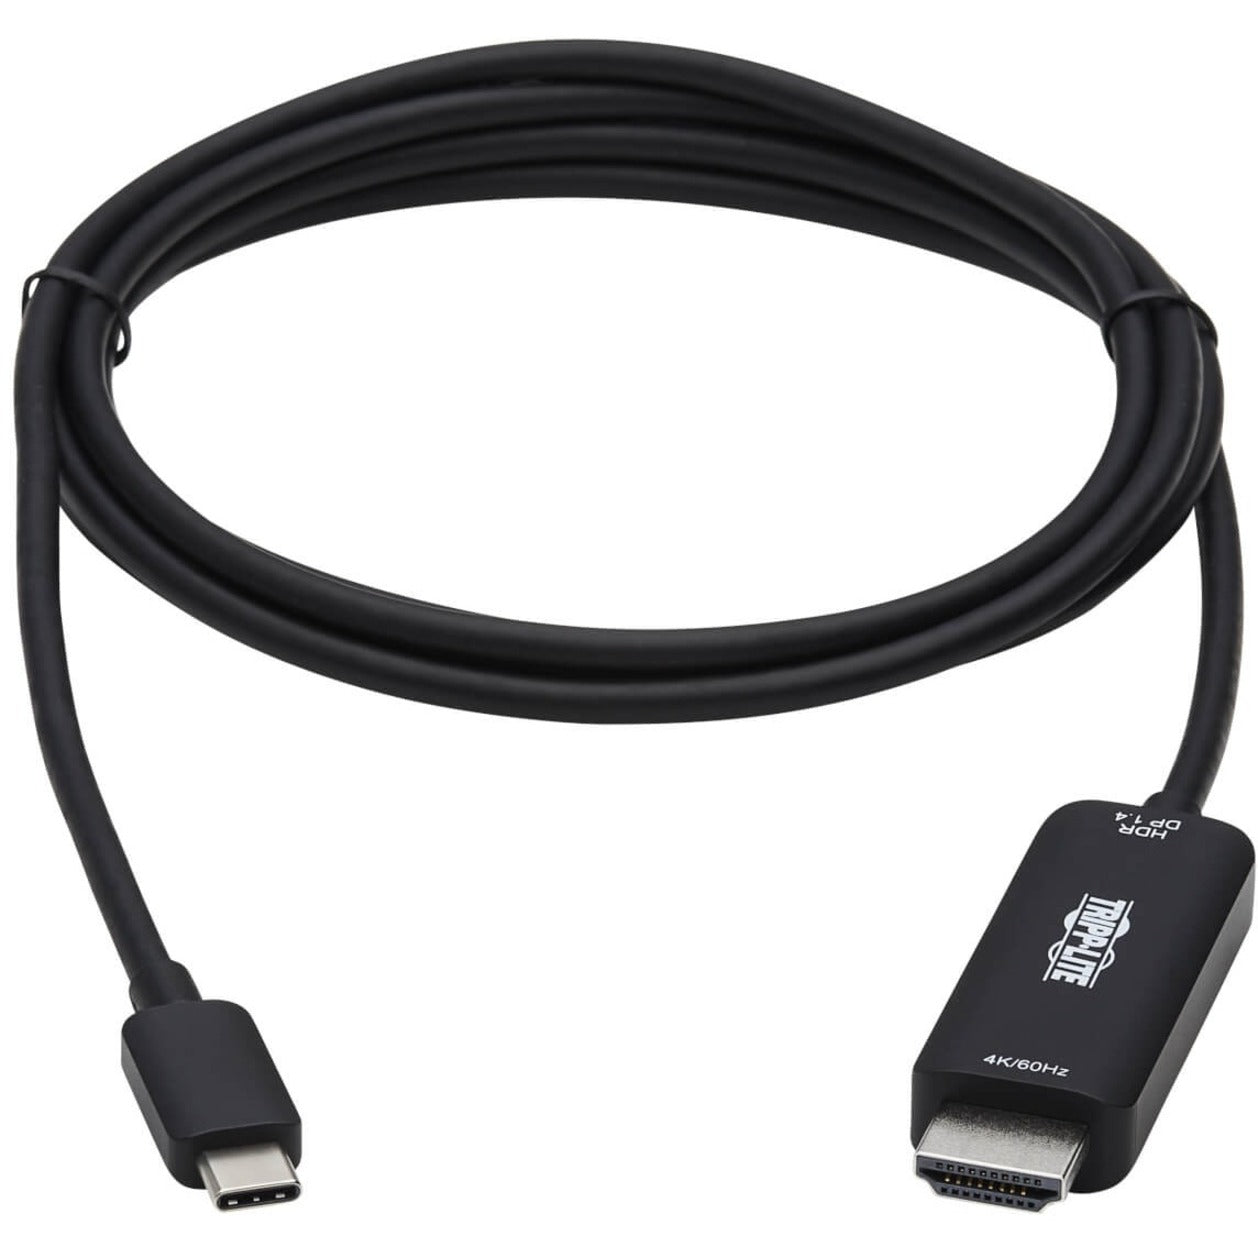 Tripp Lite U444-006-HDR4BE USB-C to HDMI Adapter Cable, M/M, Black, 6 ft.